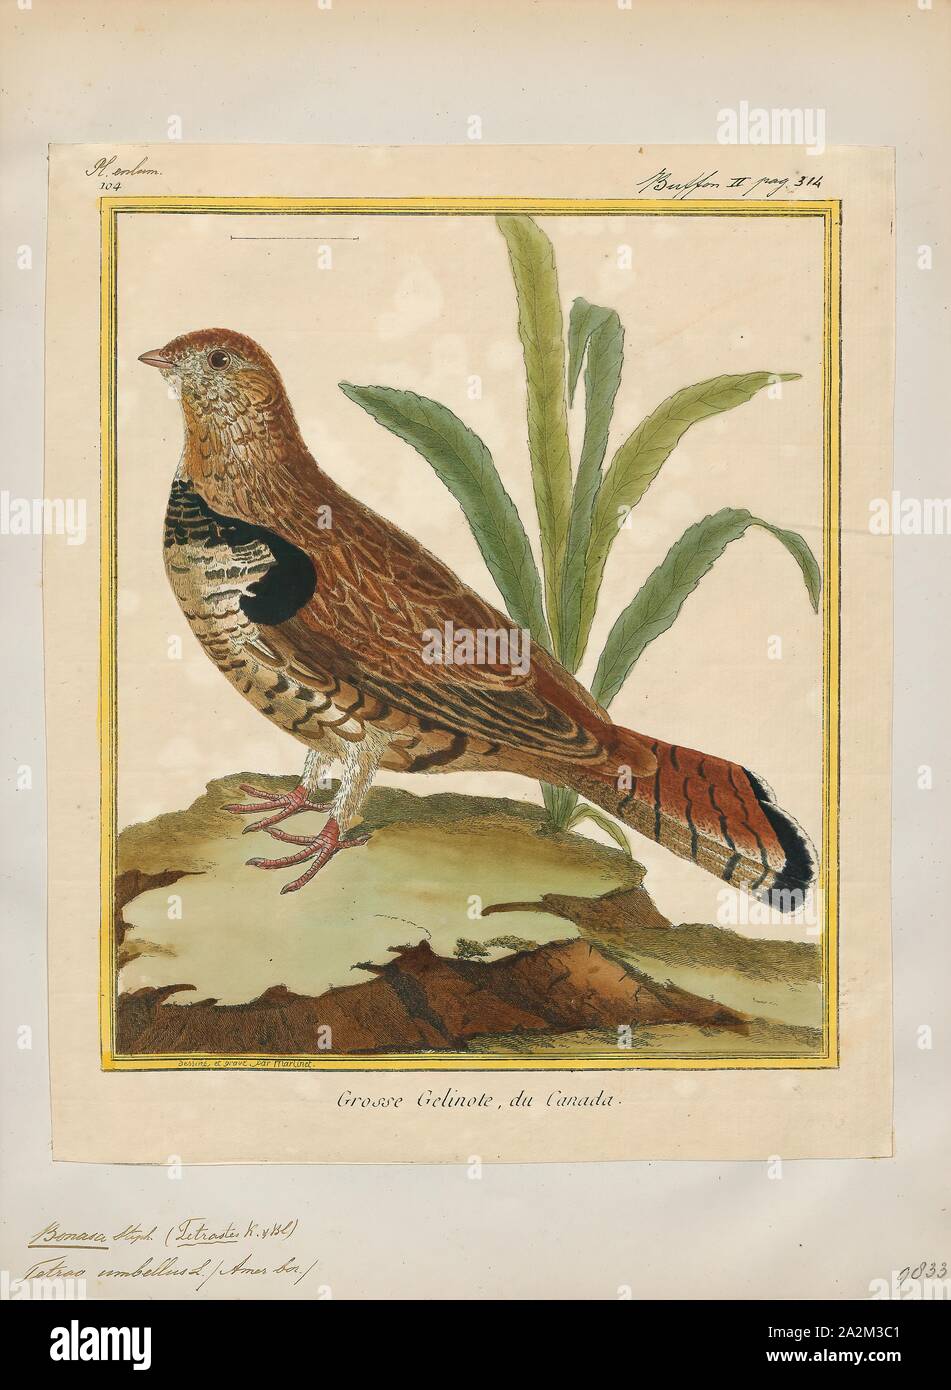 Bonasa umbellus, Print, The ruffed grouse (Bonasa umbellus) is a medium-sized grouse occurring in forests from the Appalachian Mountains across Canada to Alaska. It is non-migratory. It is the only species in the genus Bonasa., 1700-1880 Stock Photo